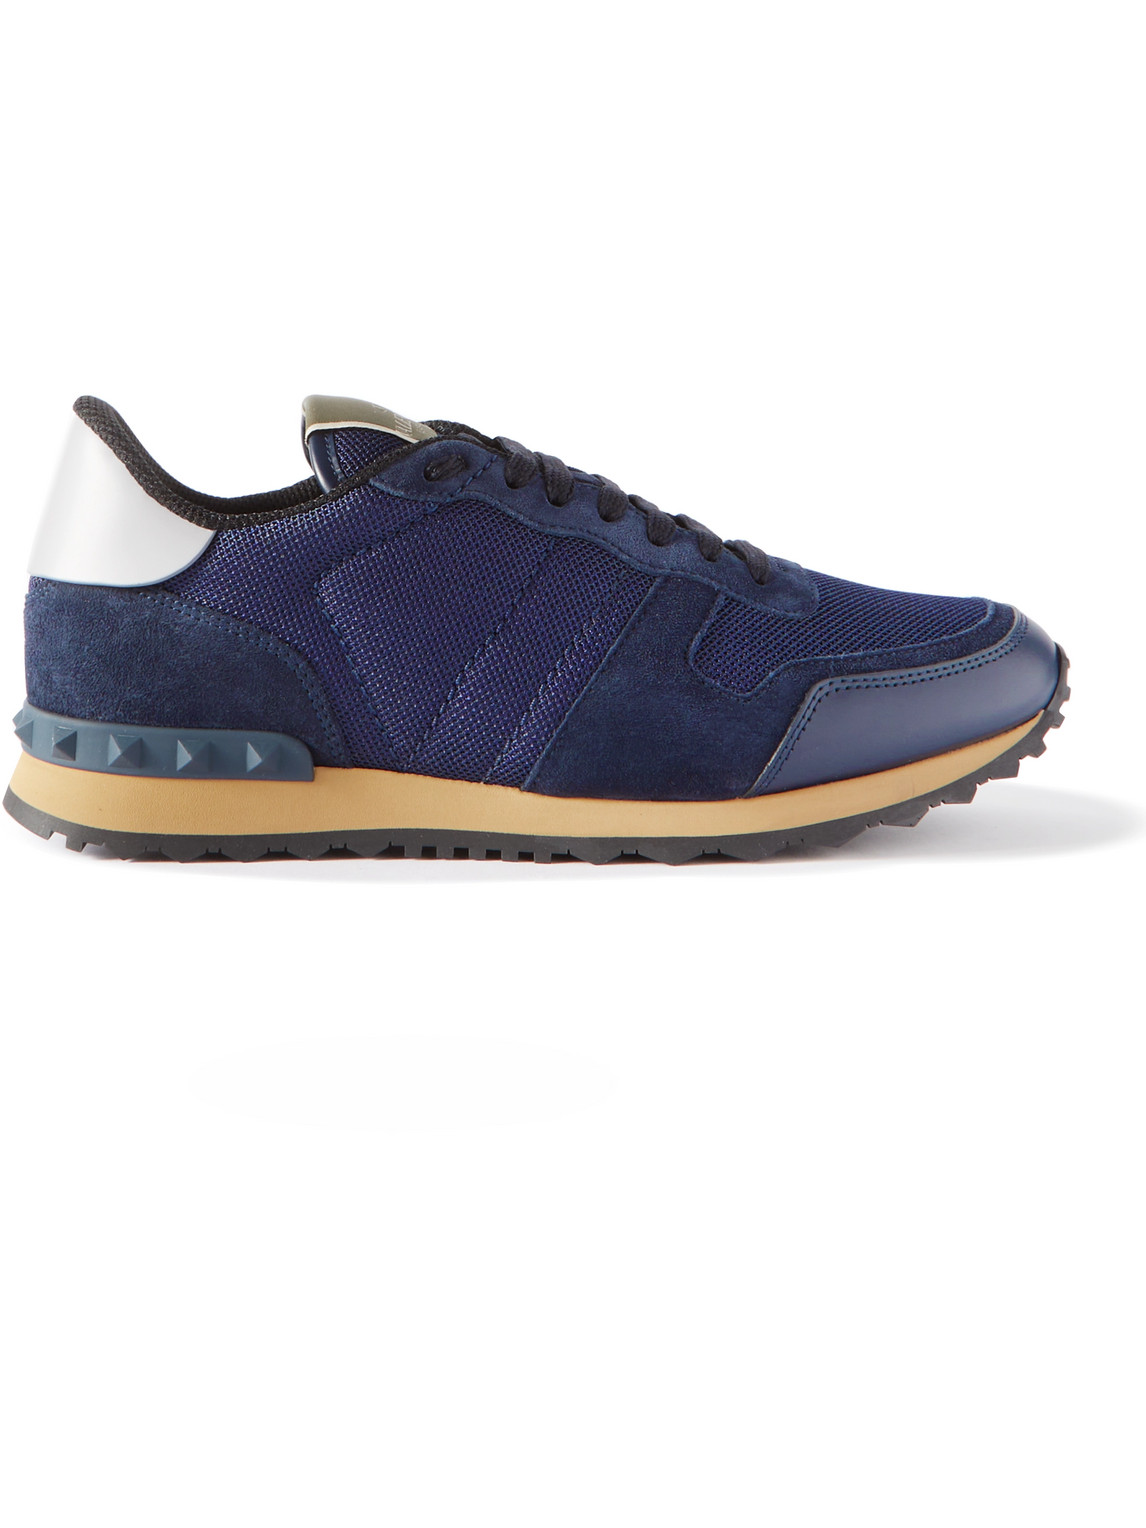 Valentino Garavani Rockrunner Leather-Trimmed Suede and Mesh Sneakers